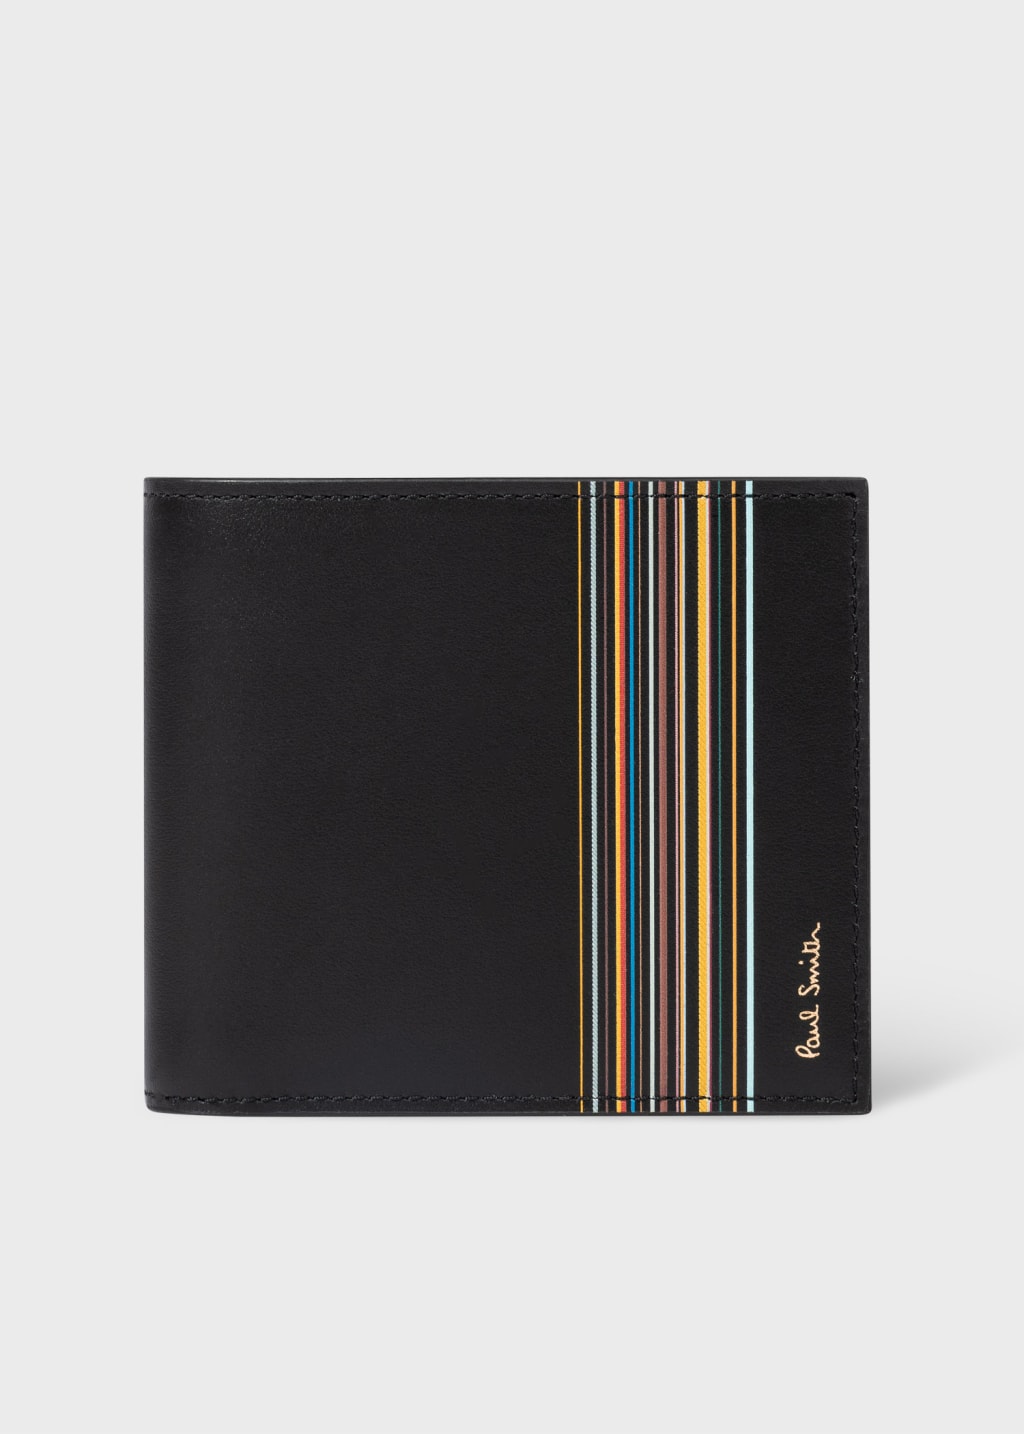 Front View - Black Leather 'Signature Stripe Block' Billfold Wallet Paul Smith